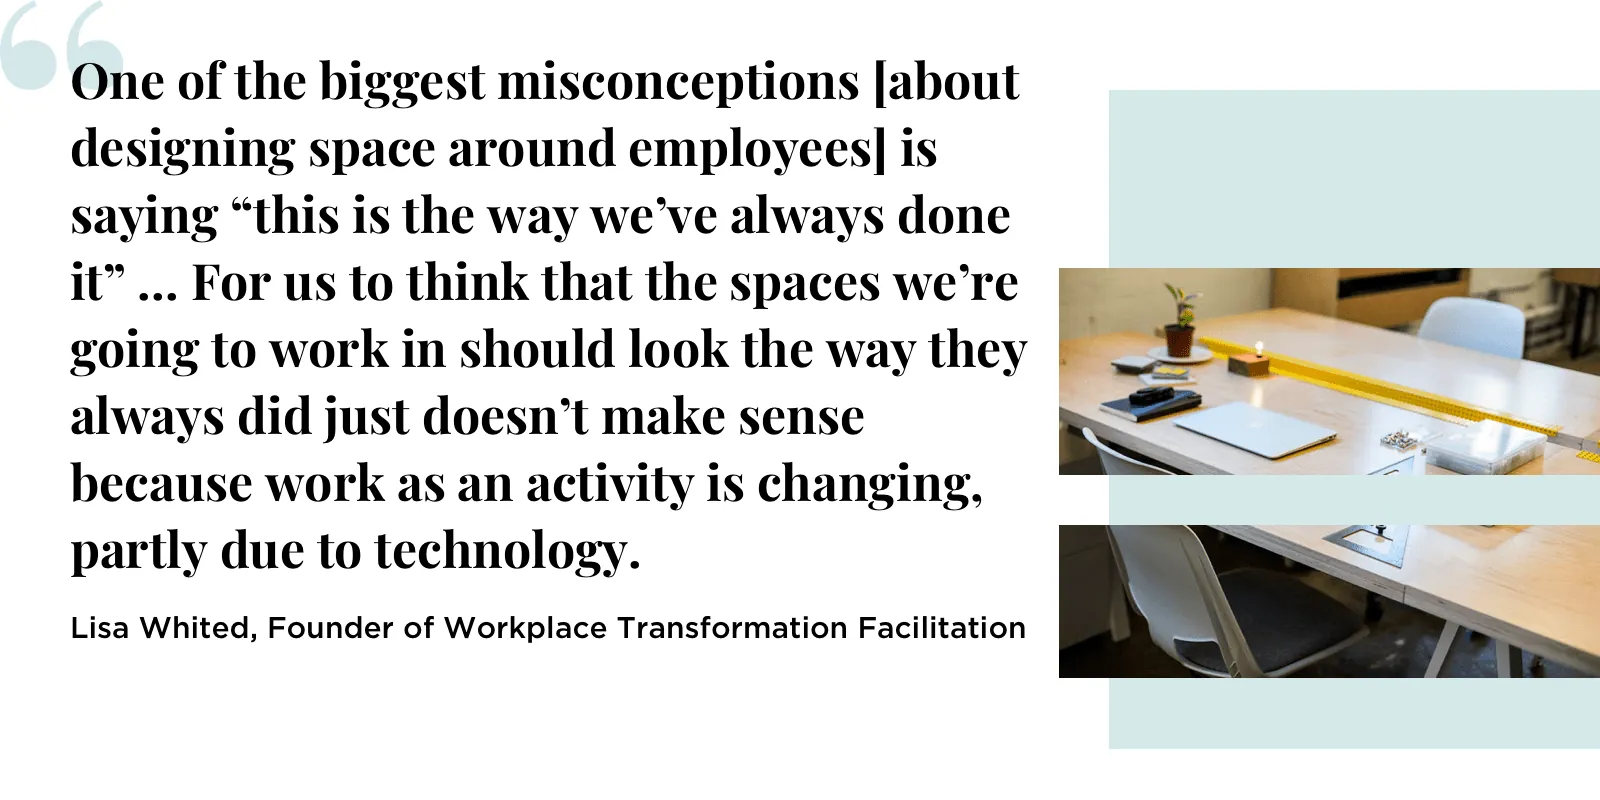 Future of work and the open office plan